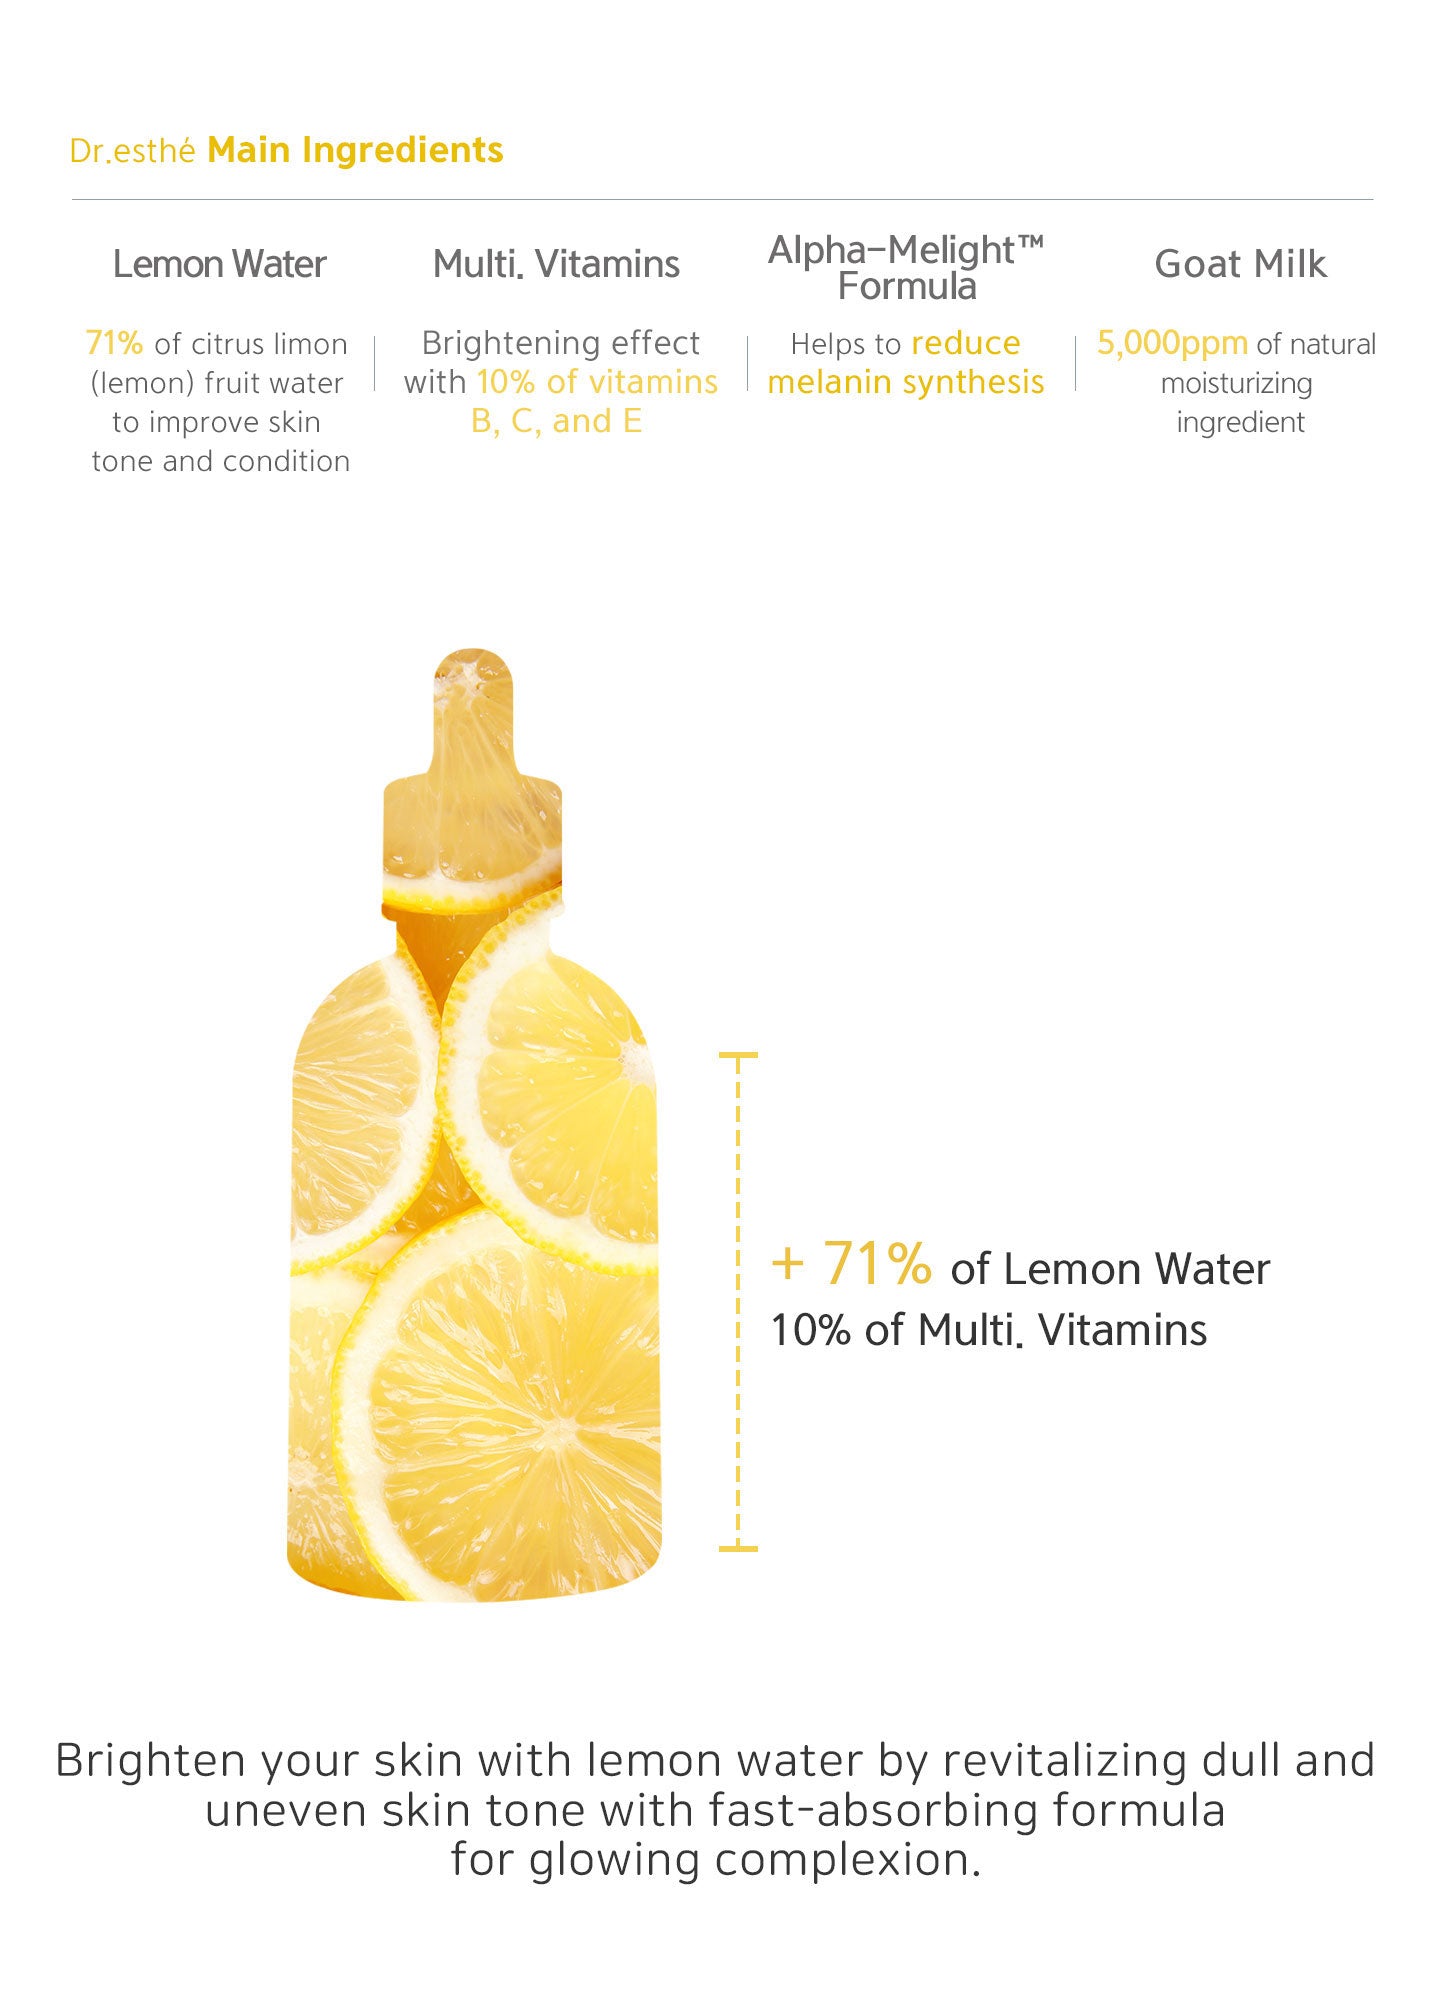 71% lemon water, 10% of vitamins B,C, and E, Alpha-melight formula helps to reduce melanin synthesis. 5000ppm of natural moisturizing ingredient. Brighten your skin with lemon water by revitalizing dull and uneven skin tone with fast-absorbing formula.